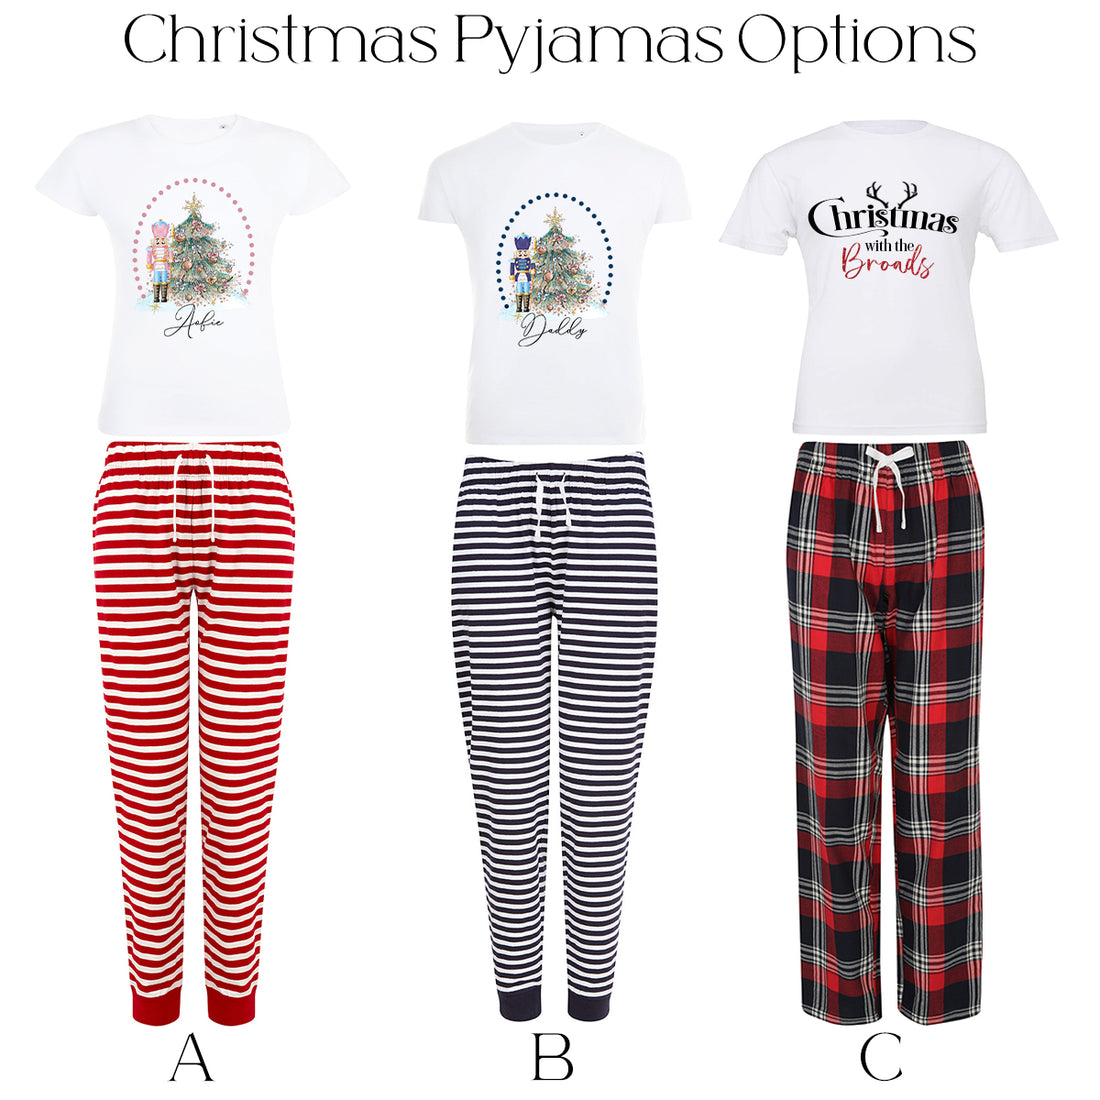 Christmas Pyjamas aren't just for Christmas - well they kind of are